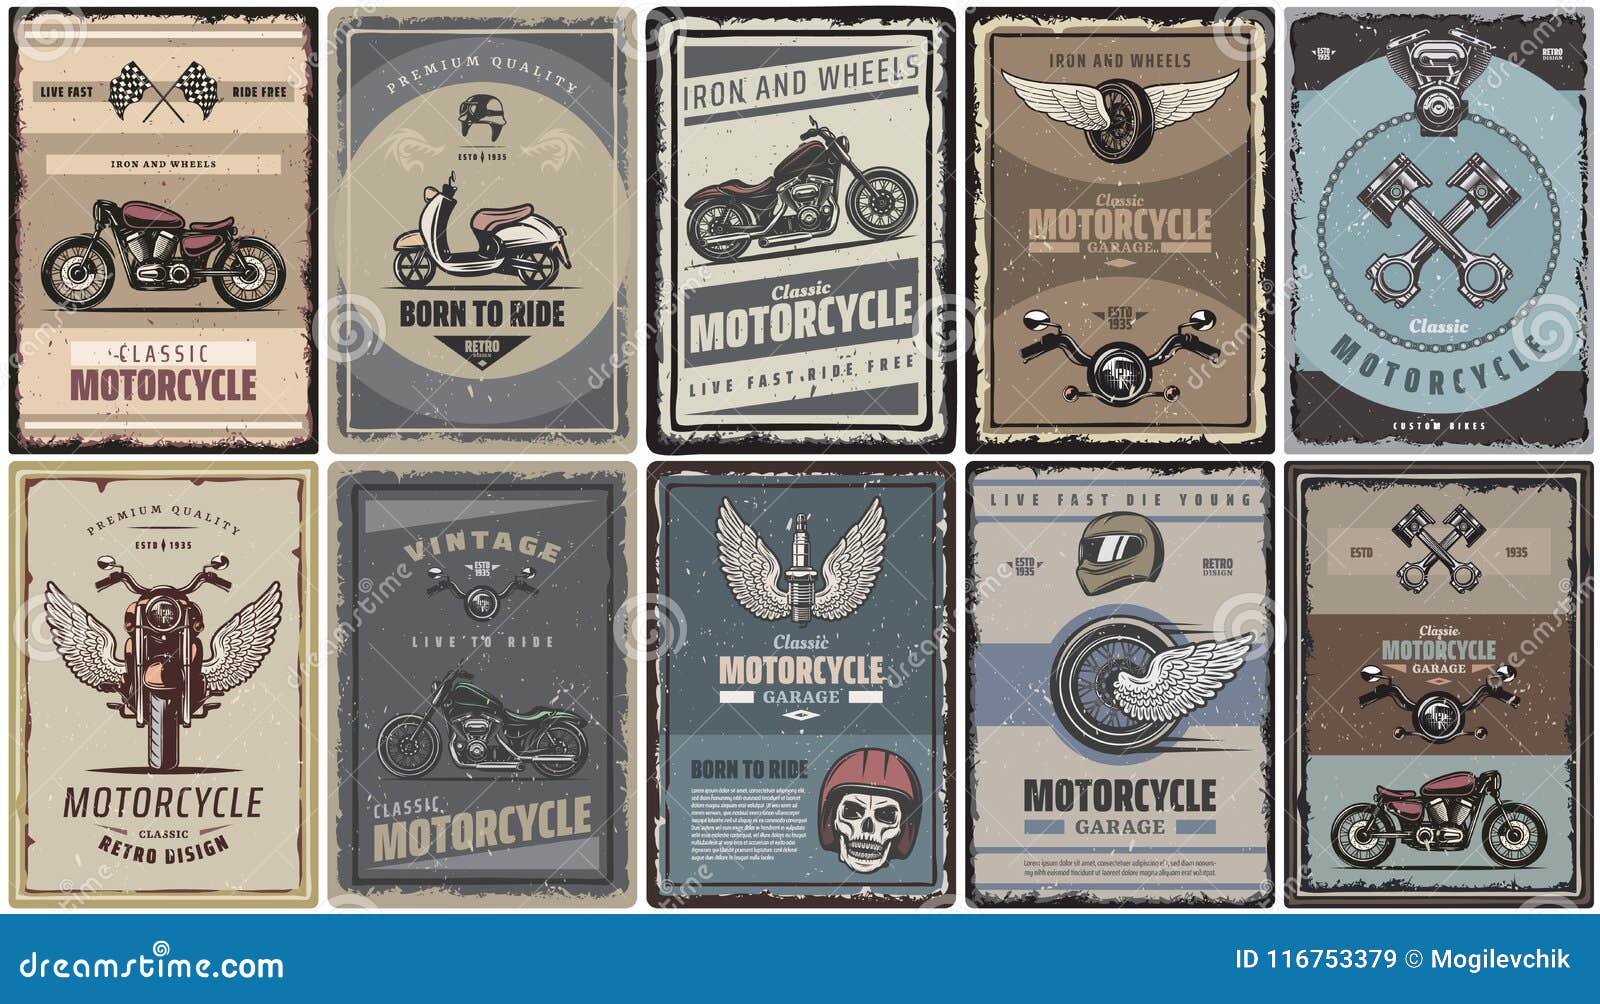 vintage colored motorcycle posters set